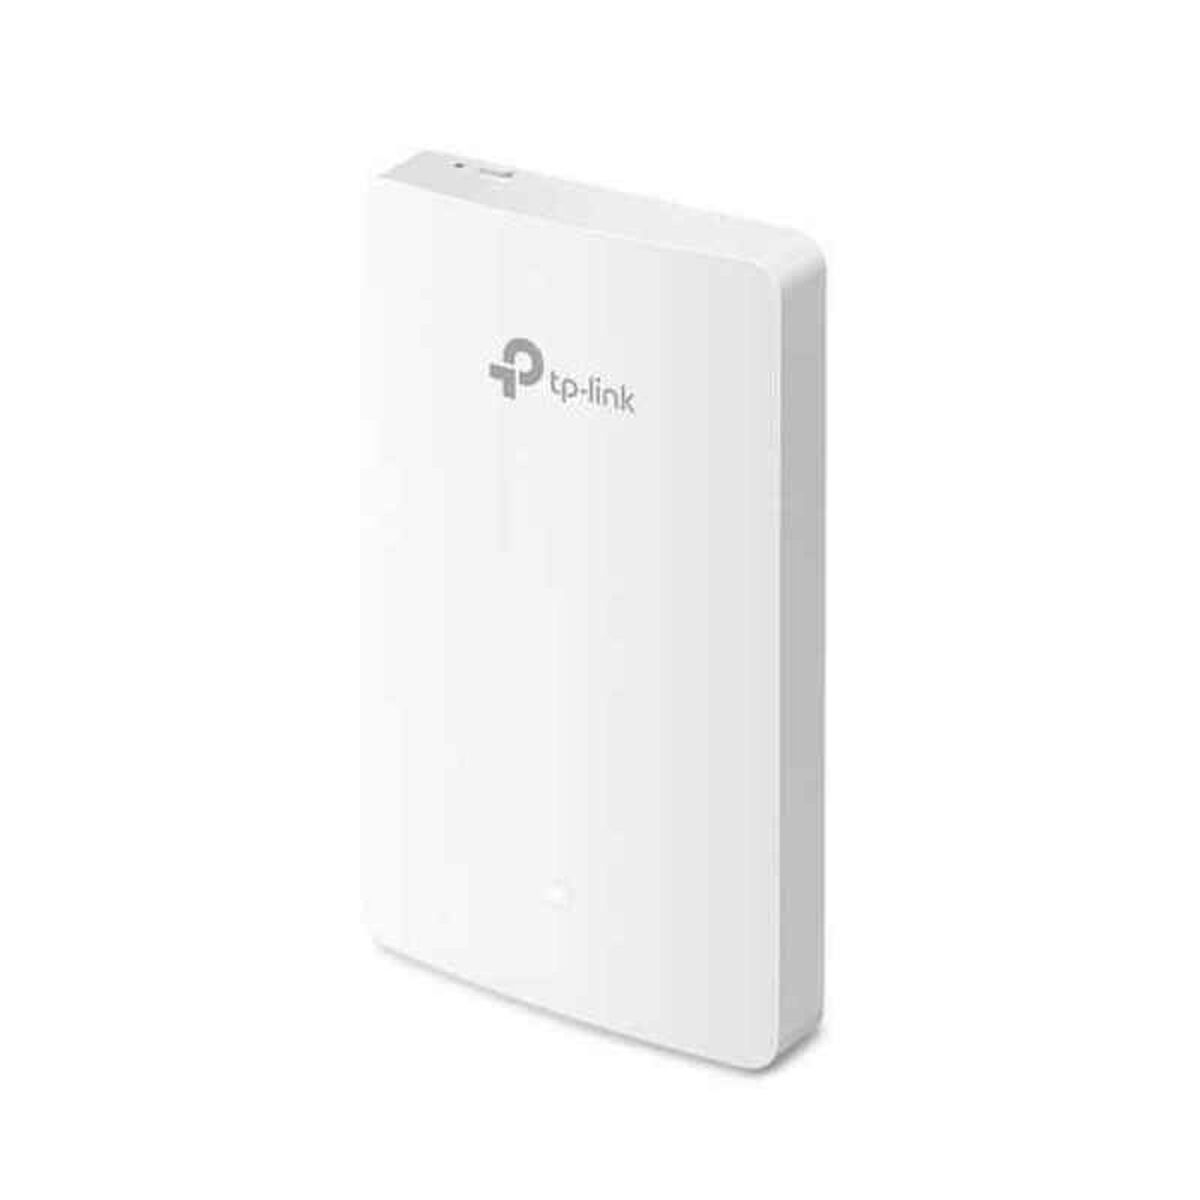 Access point TP-Link EAP235-WALL White Black, TP-Link, Computing, Network devices, access-point-tp-link-eap235-wall-white-black, Brand_TP-Link, category-reference-2609, category-reference-2803, category-reference-2820, category-reference-t-19685, category-reference-t-19914, Condition_NEW, networks/wiring, Price_50 - 100, Teleworking, RiotNook